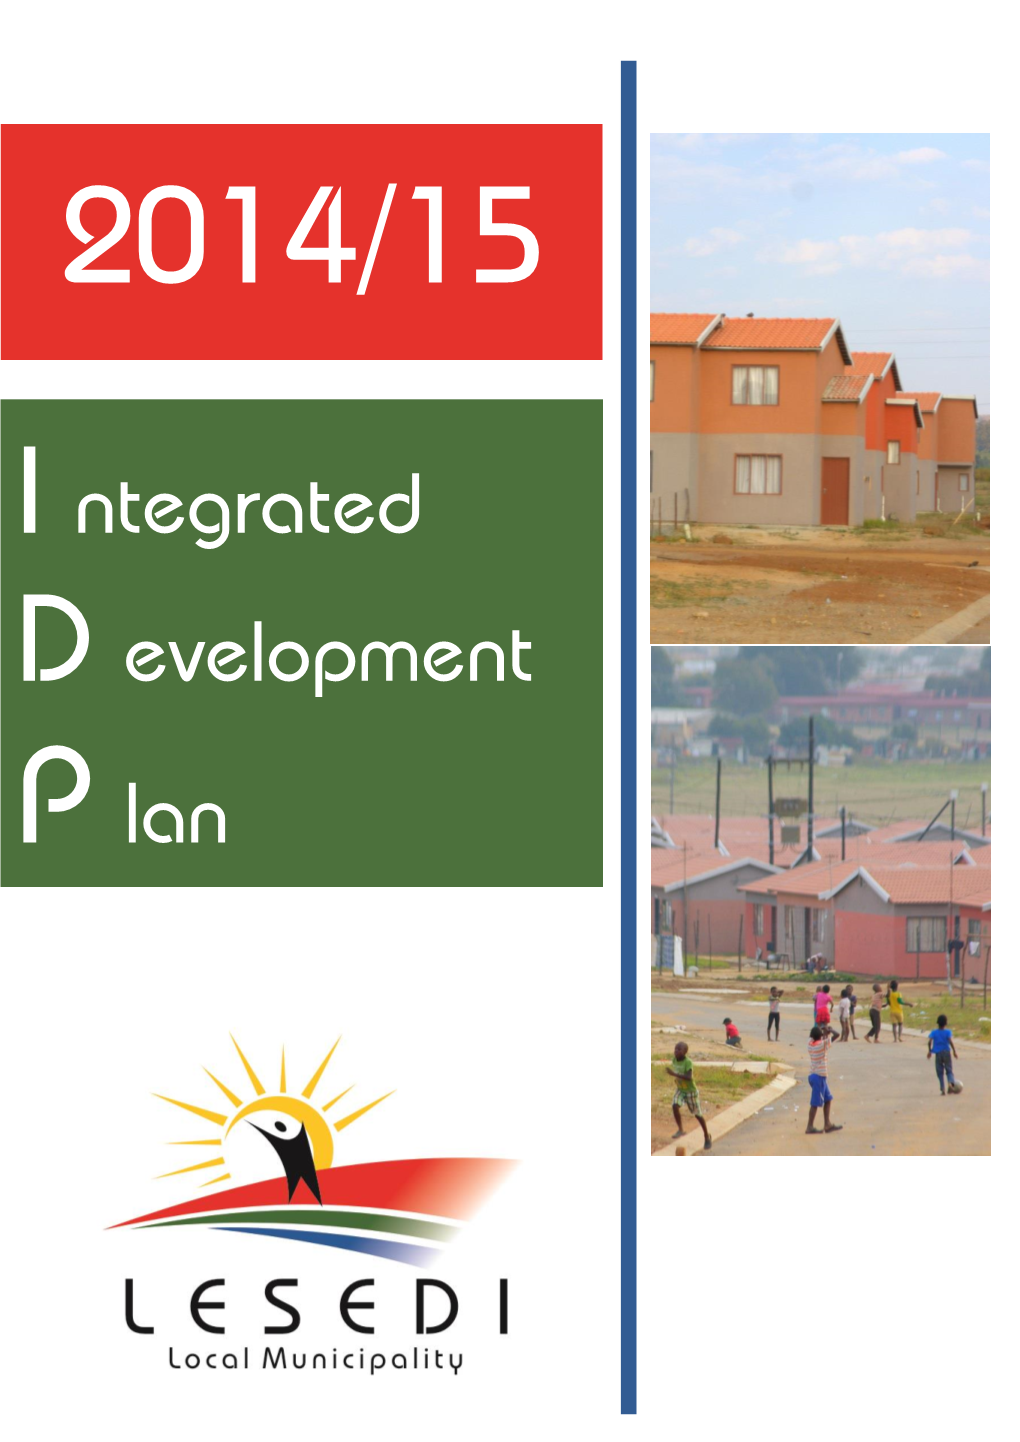 Integrated Development Plan Is Aimed at Outlining Promoting Public Participation and Good Meaningful Municipality’S Plans and Programmes Over a Five Year Period